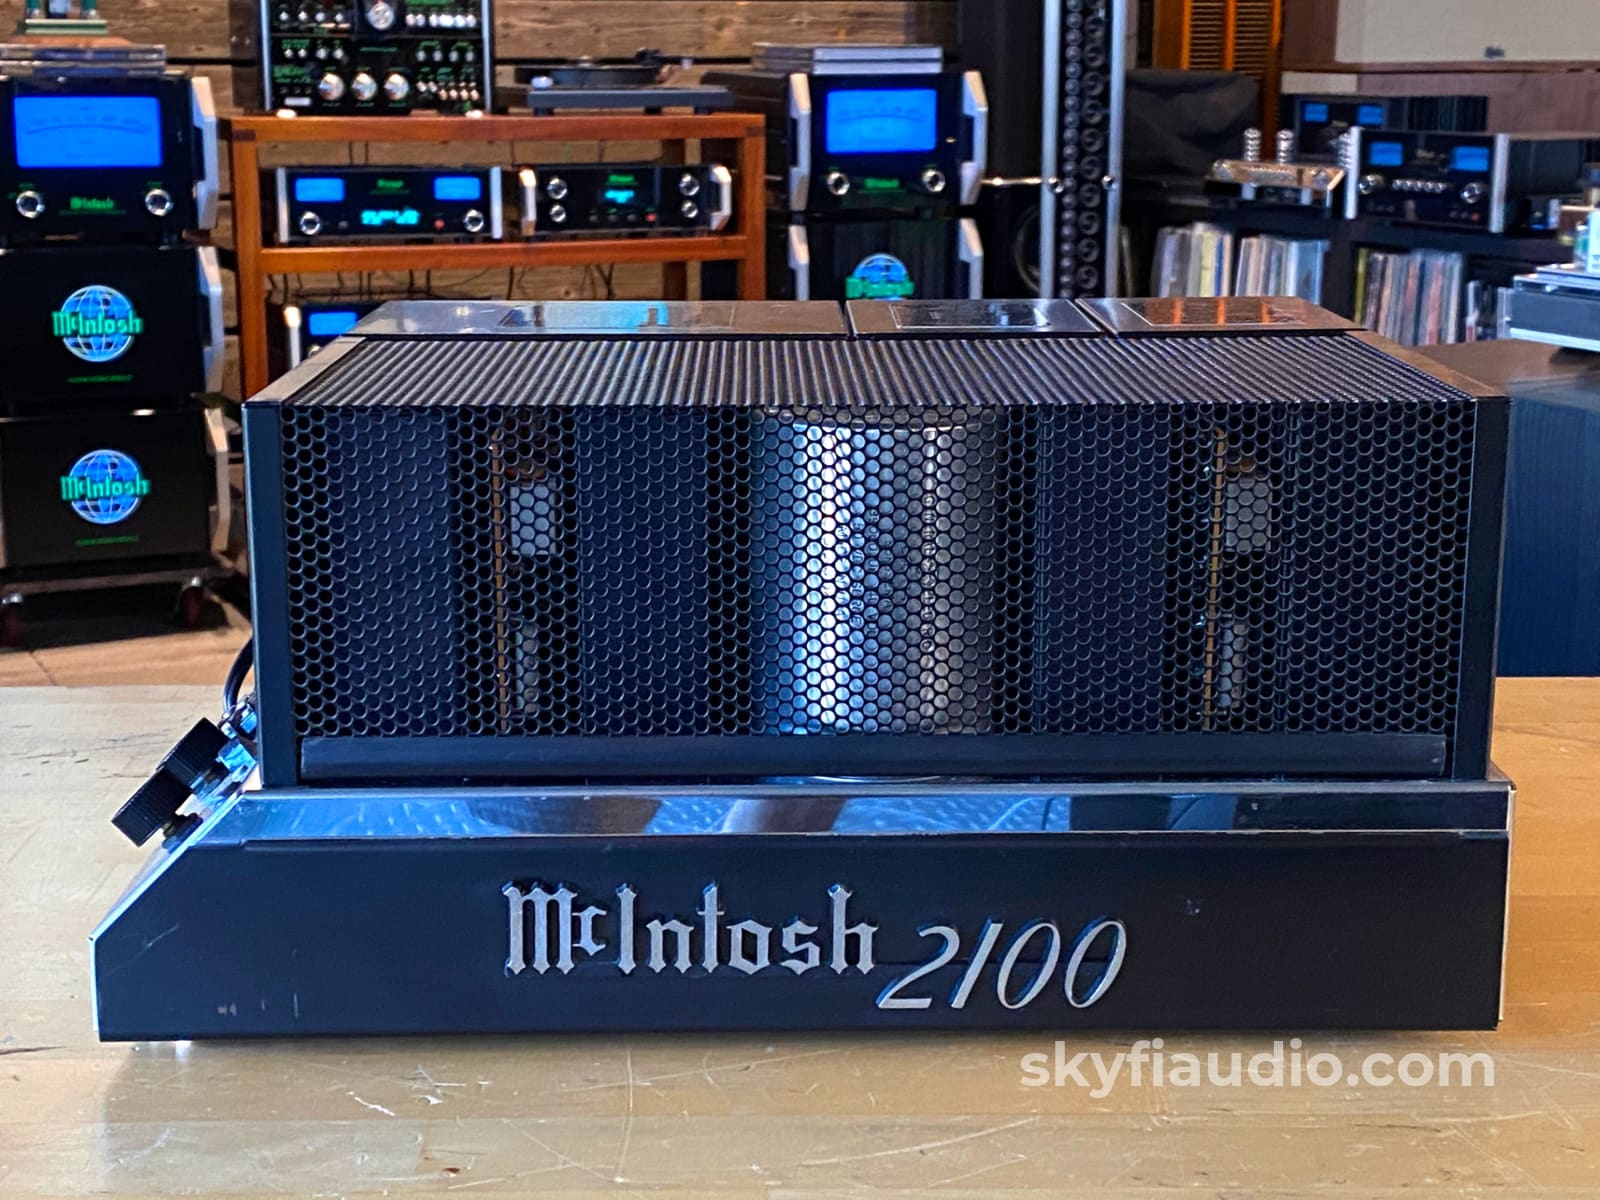 Mcintosh Mc2100 Vintage Amplifier From Abkco Music & Records - The Rolling Stones And More!